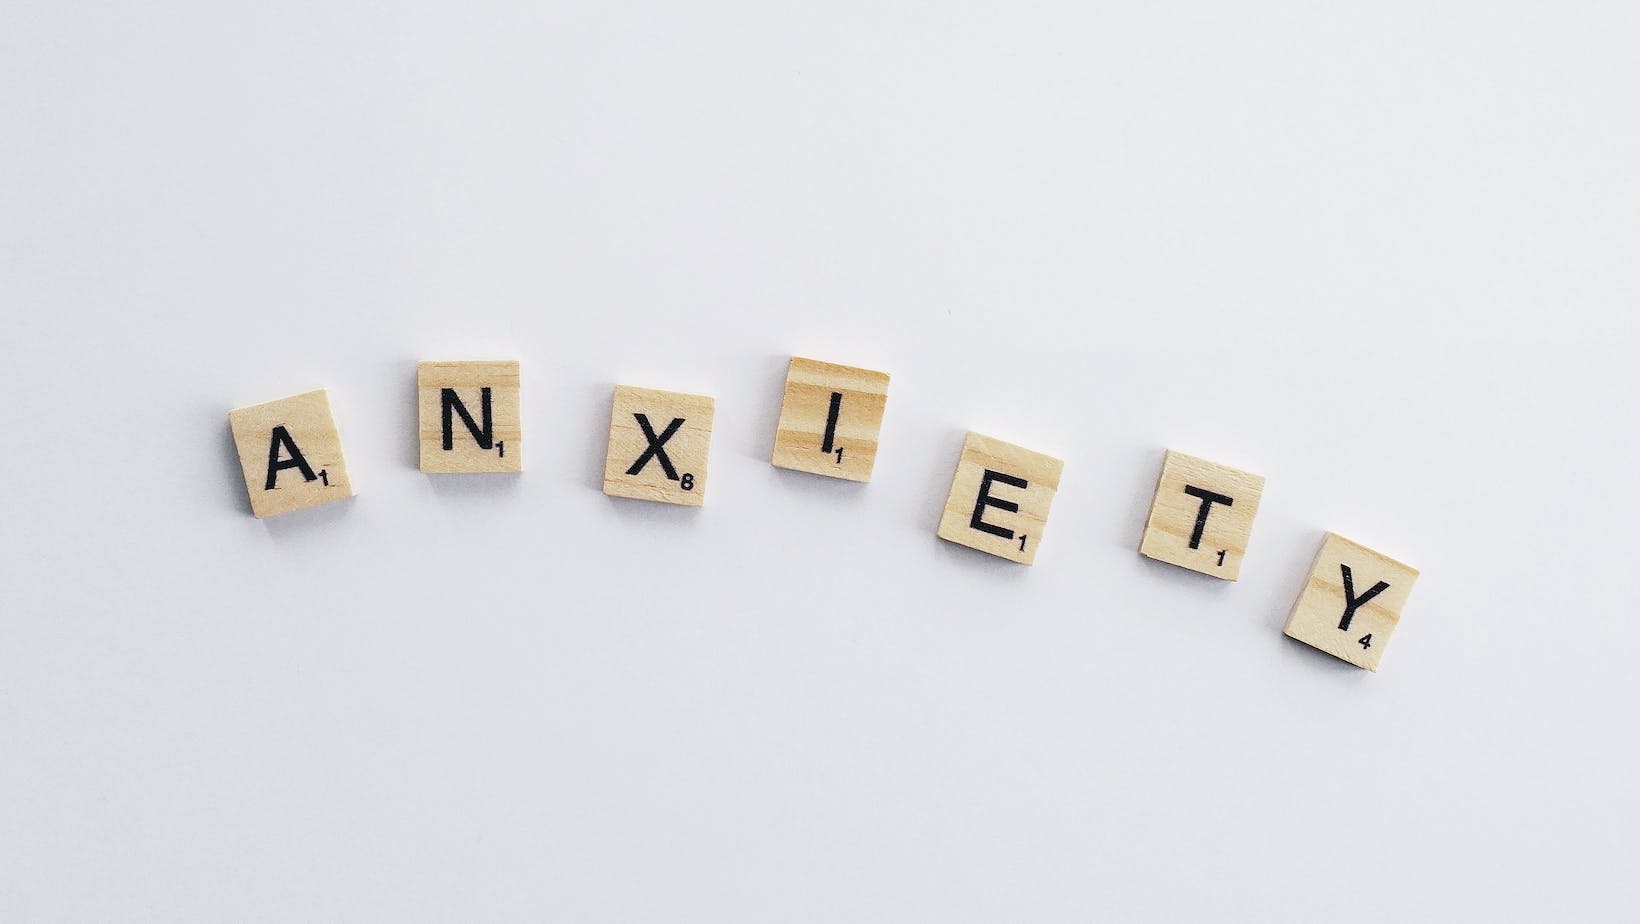 in late adulthood, attitudes about death shift. anxiety _____ while hope _____.